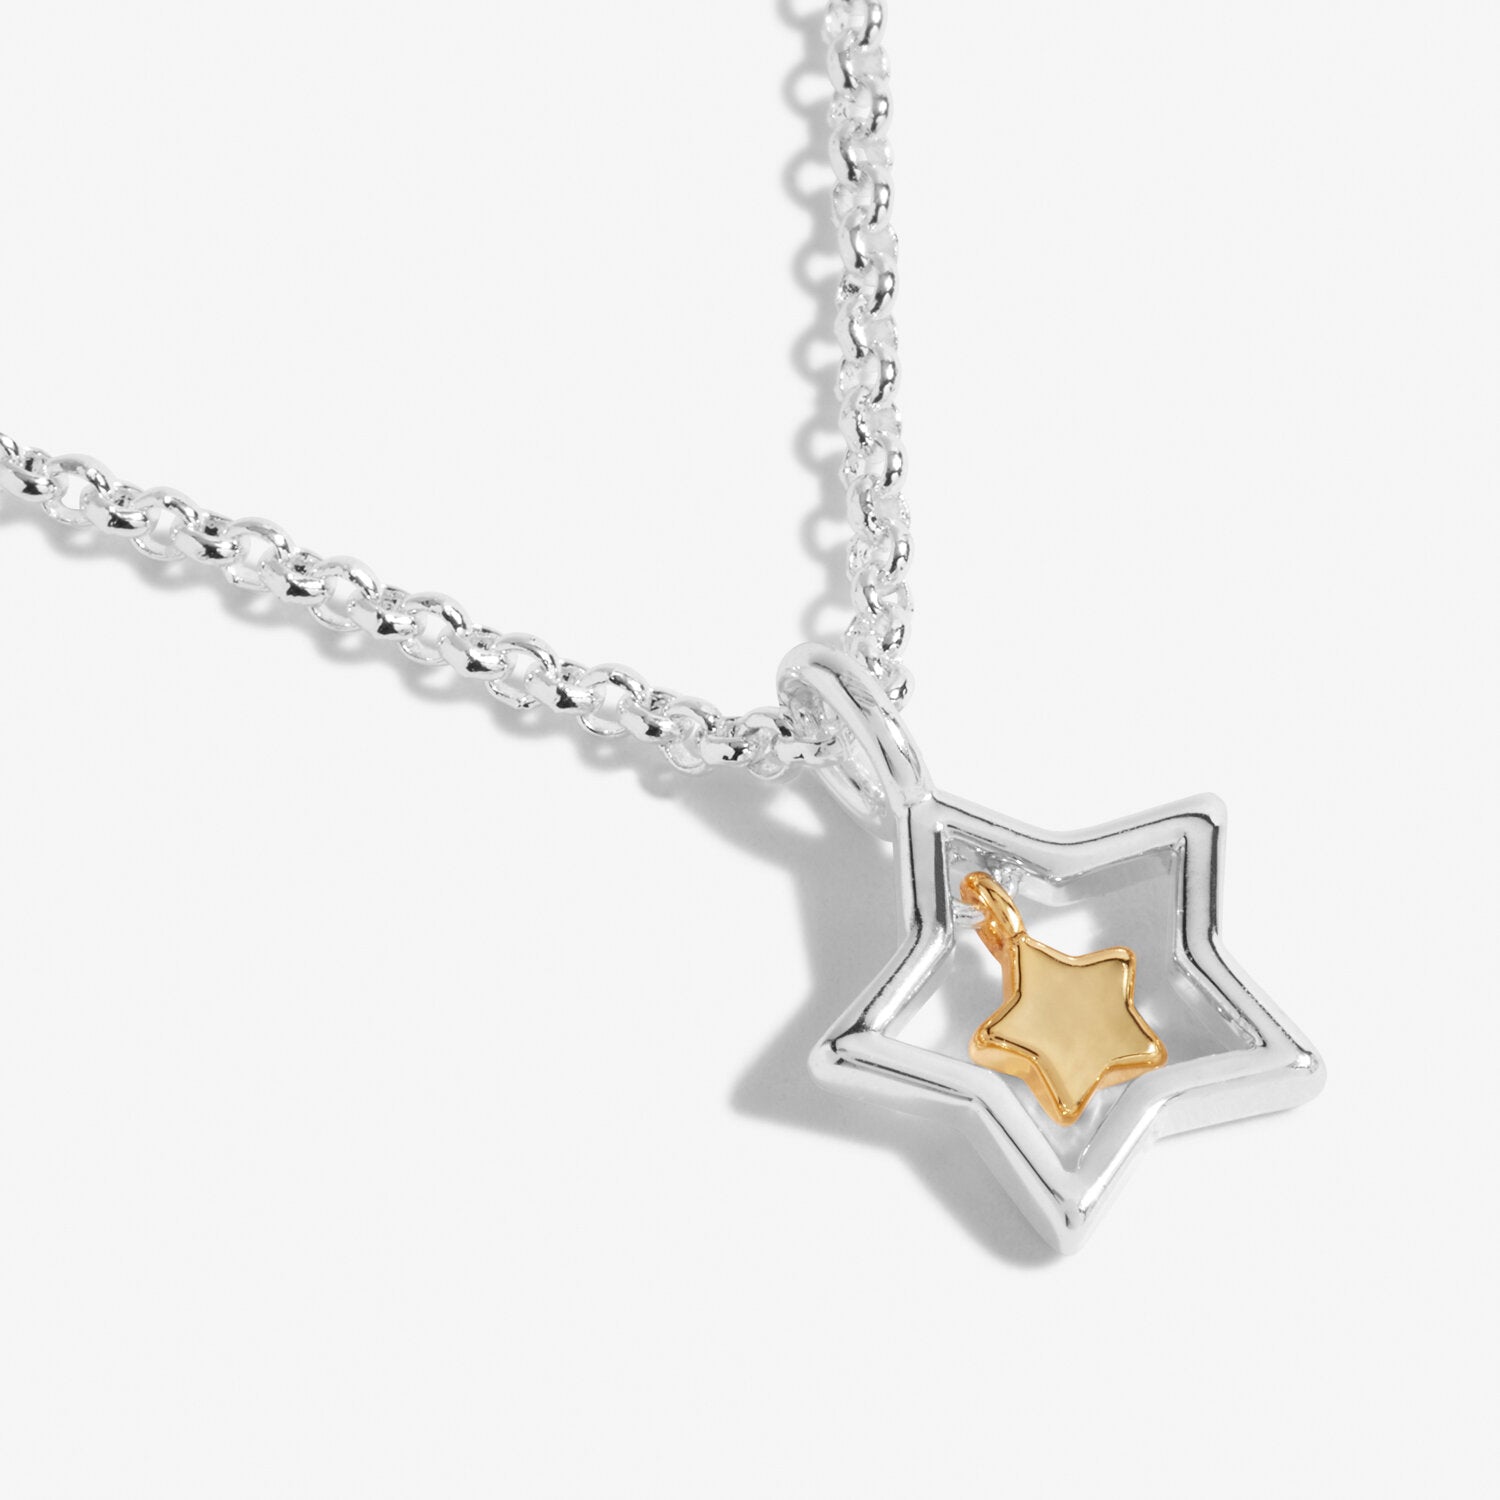 A Little - Someone Special - Necklace